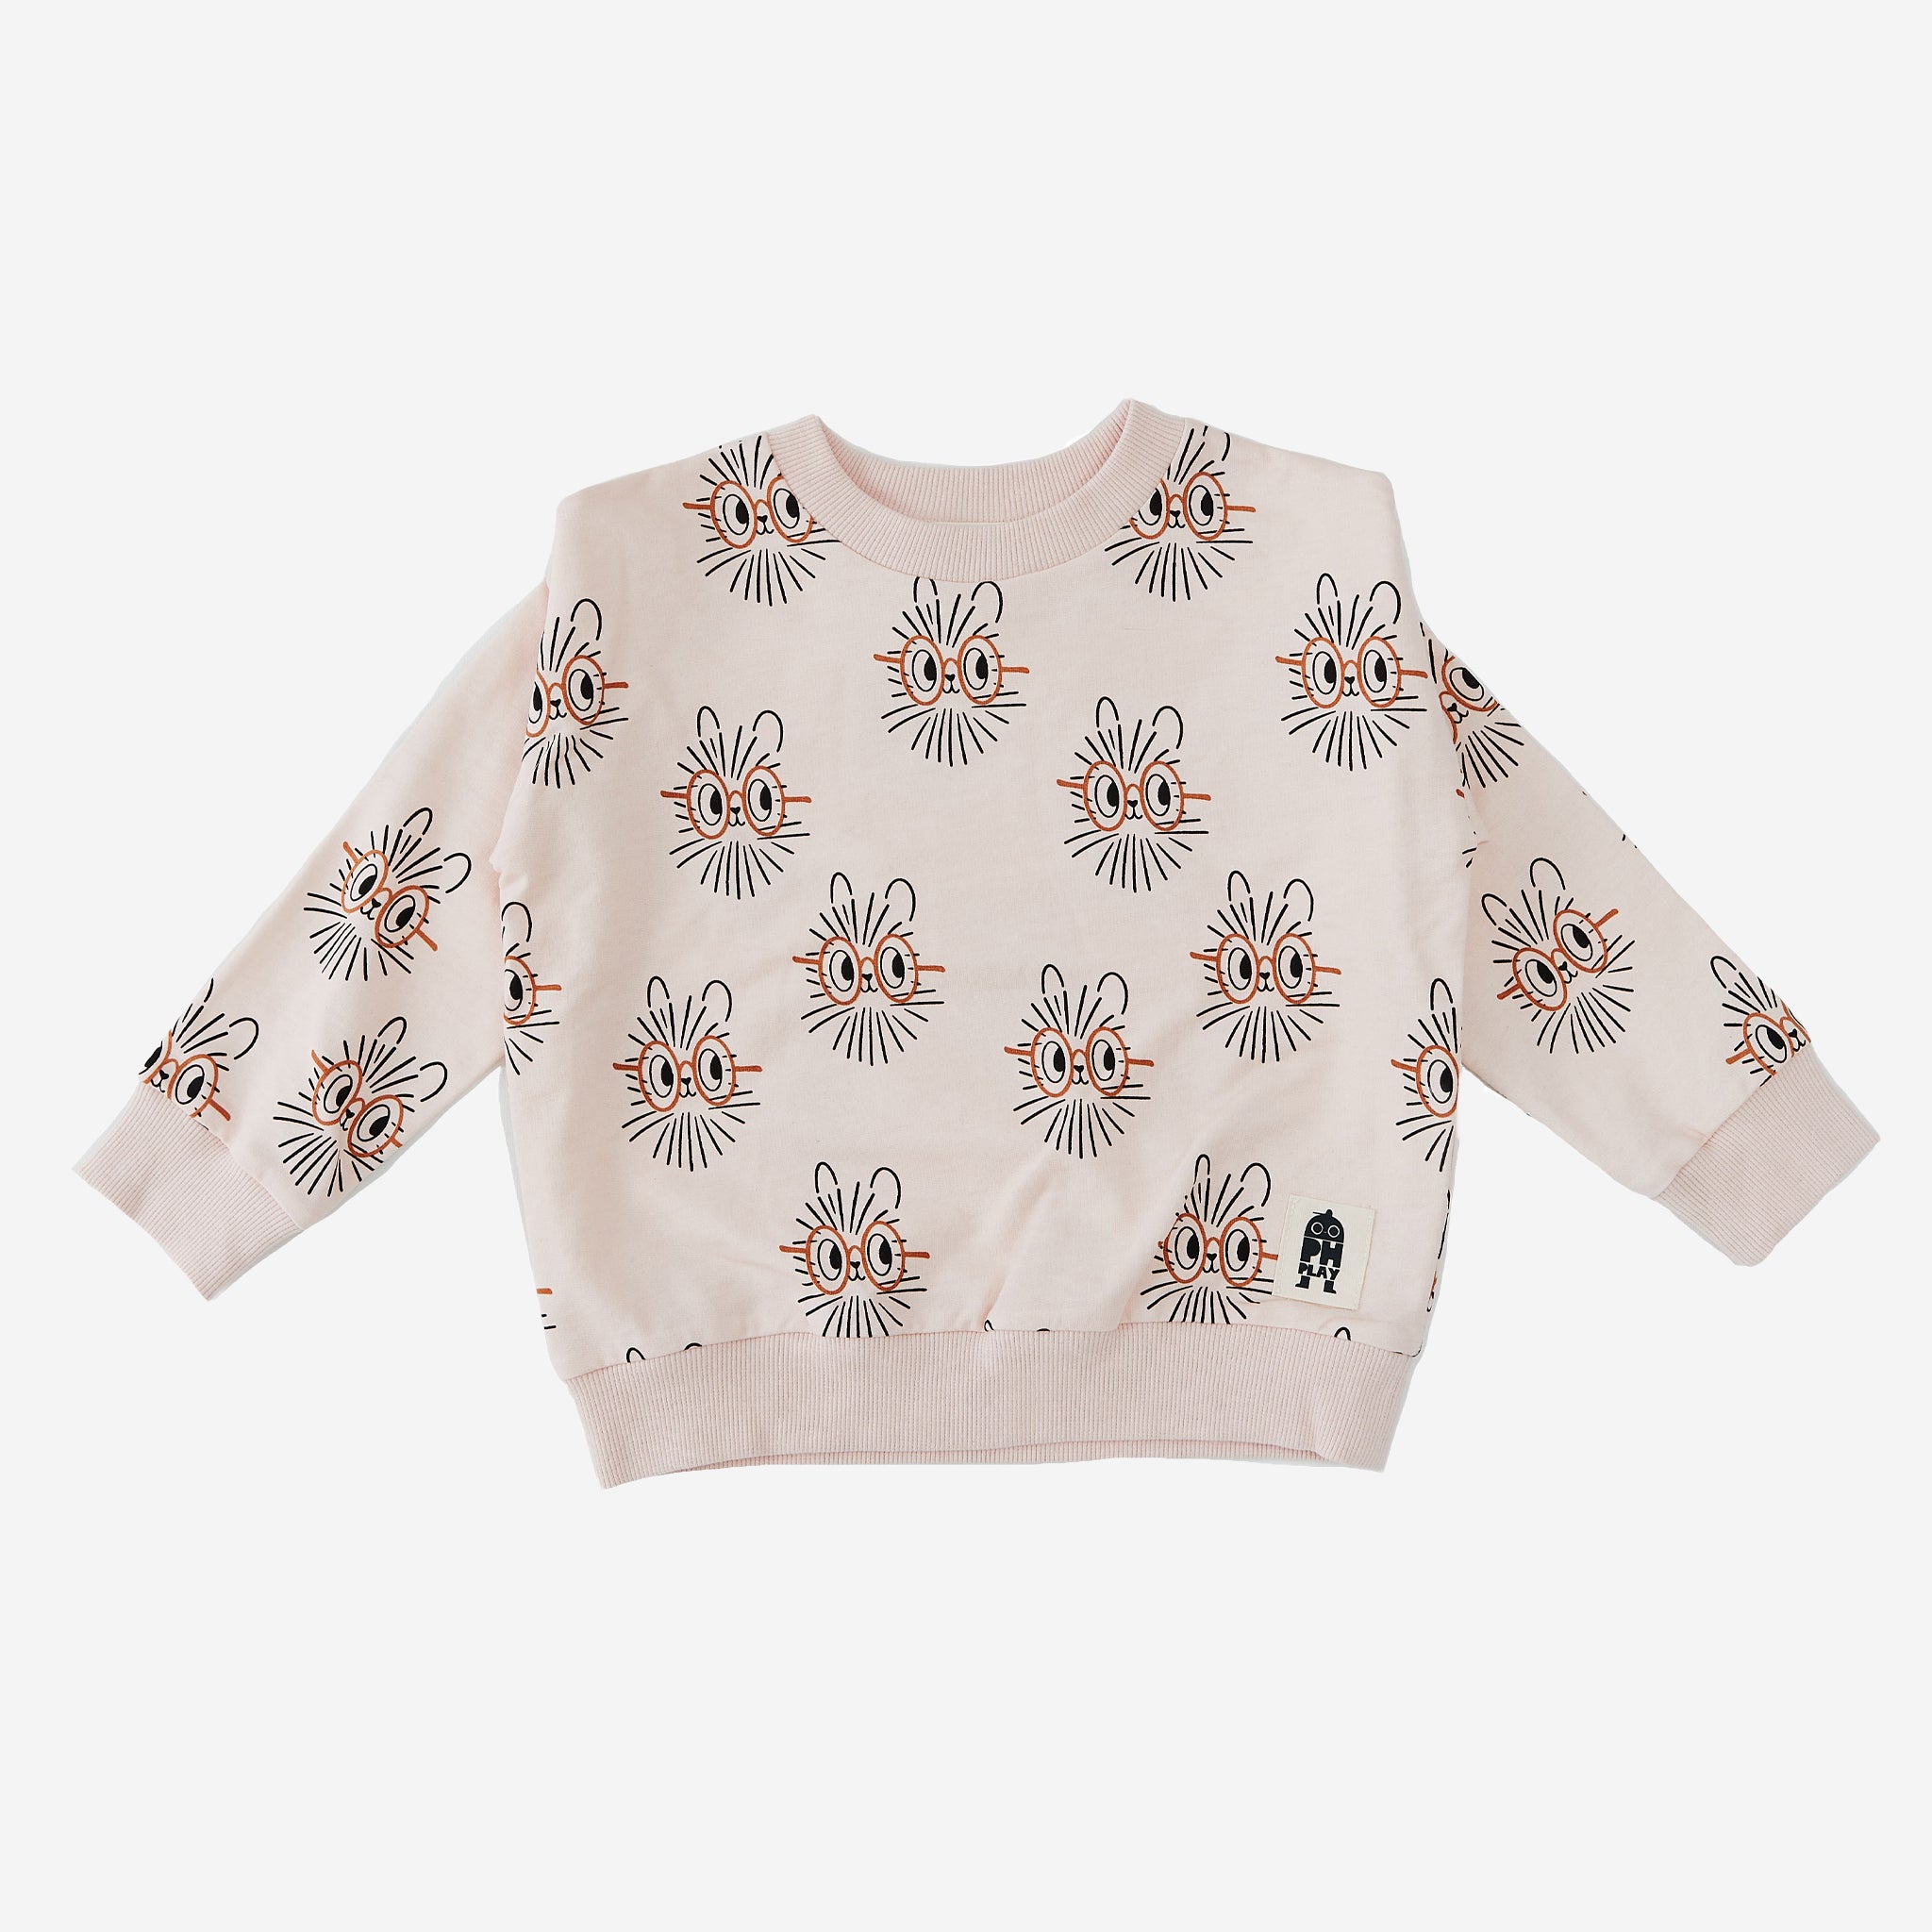 Hedgehog sweatshirt with light peach color background and motives, the sweatshirt has rib round neck and cuffs